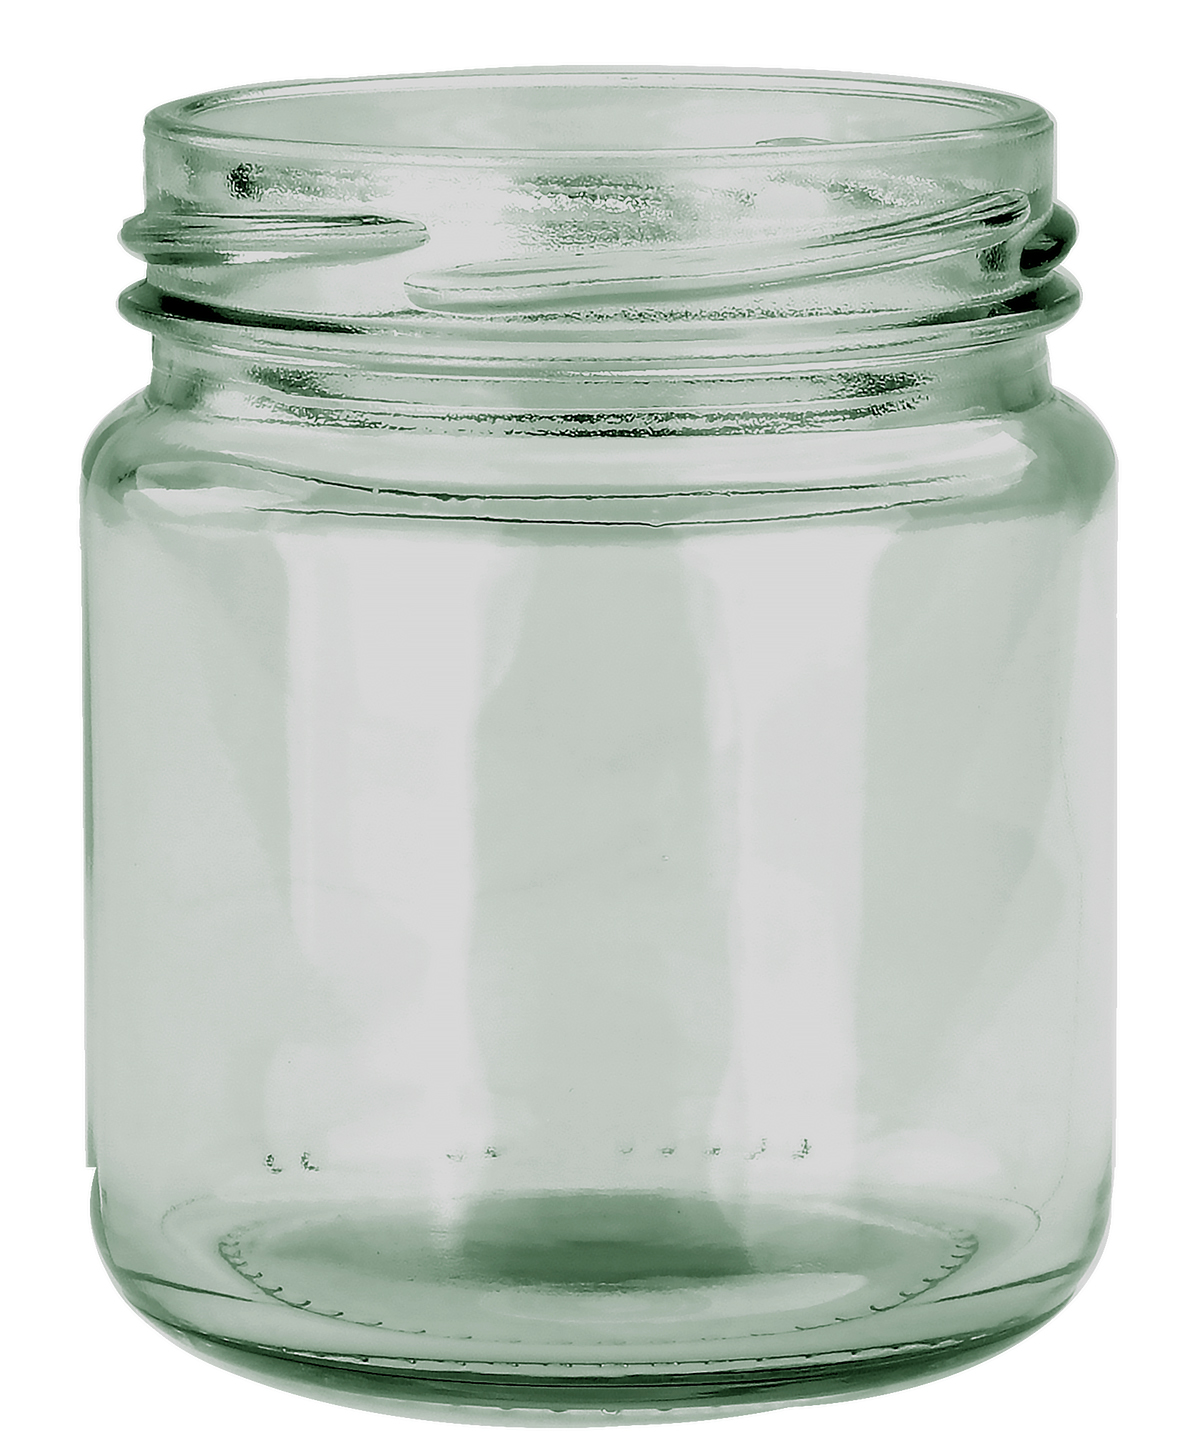 Round Glass Jars - 200ml- Glass Jars with 5 Lid Colour Options